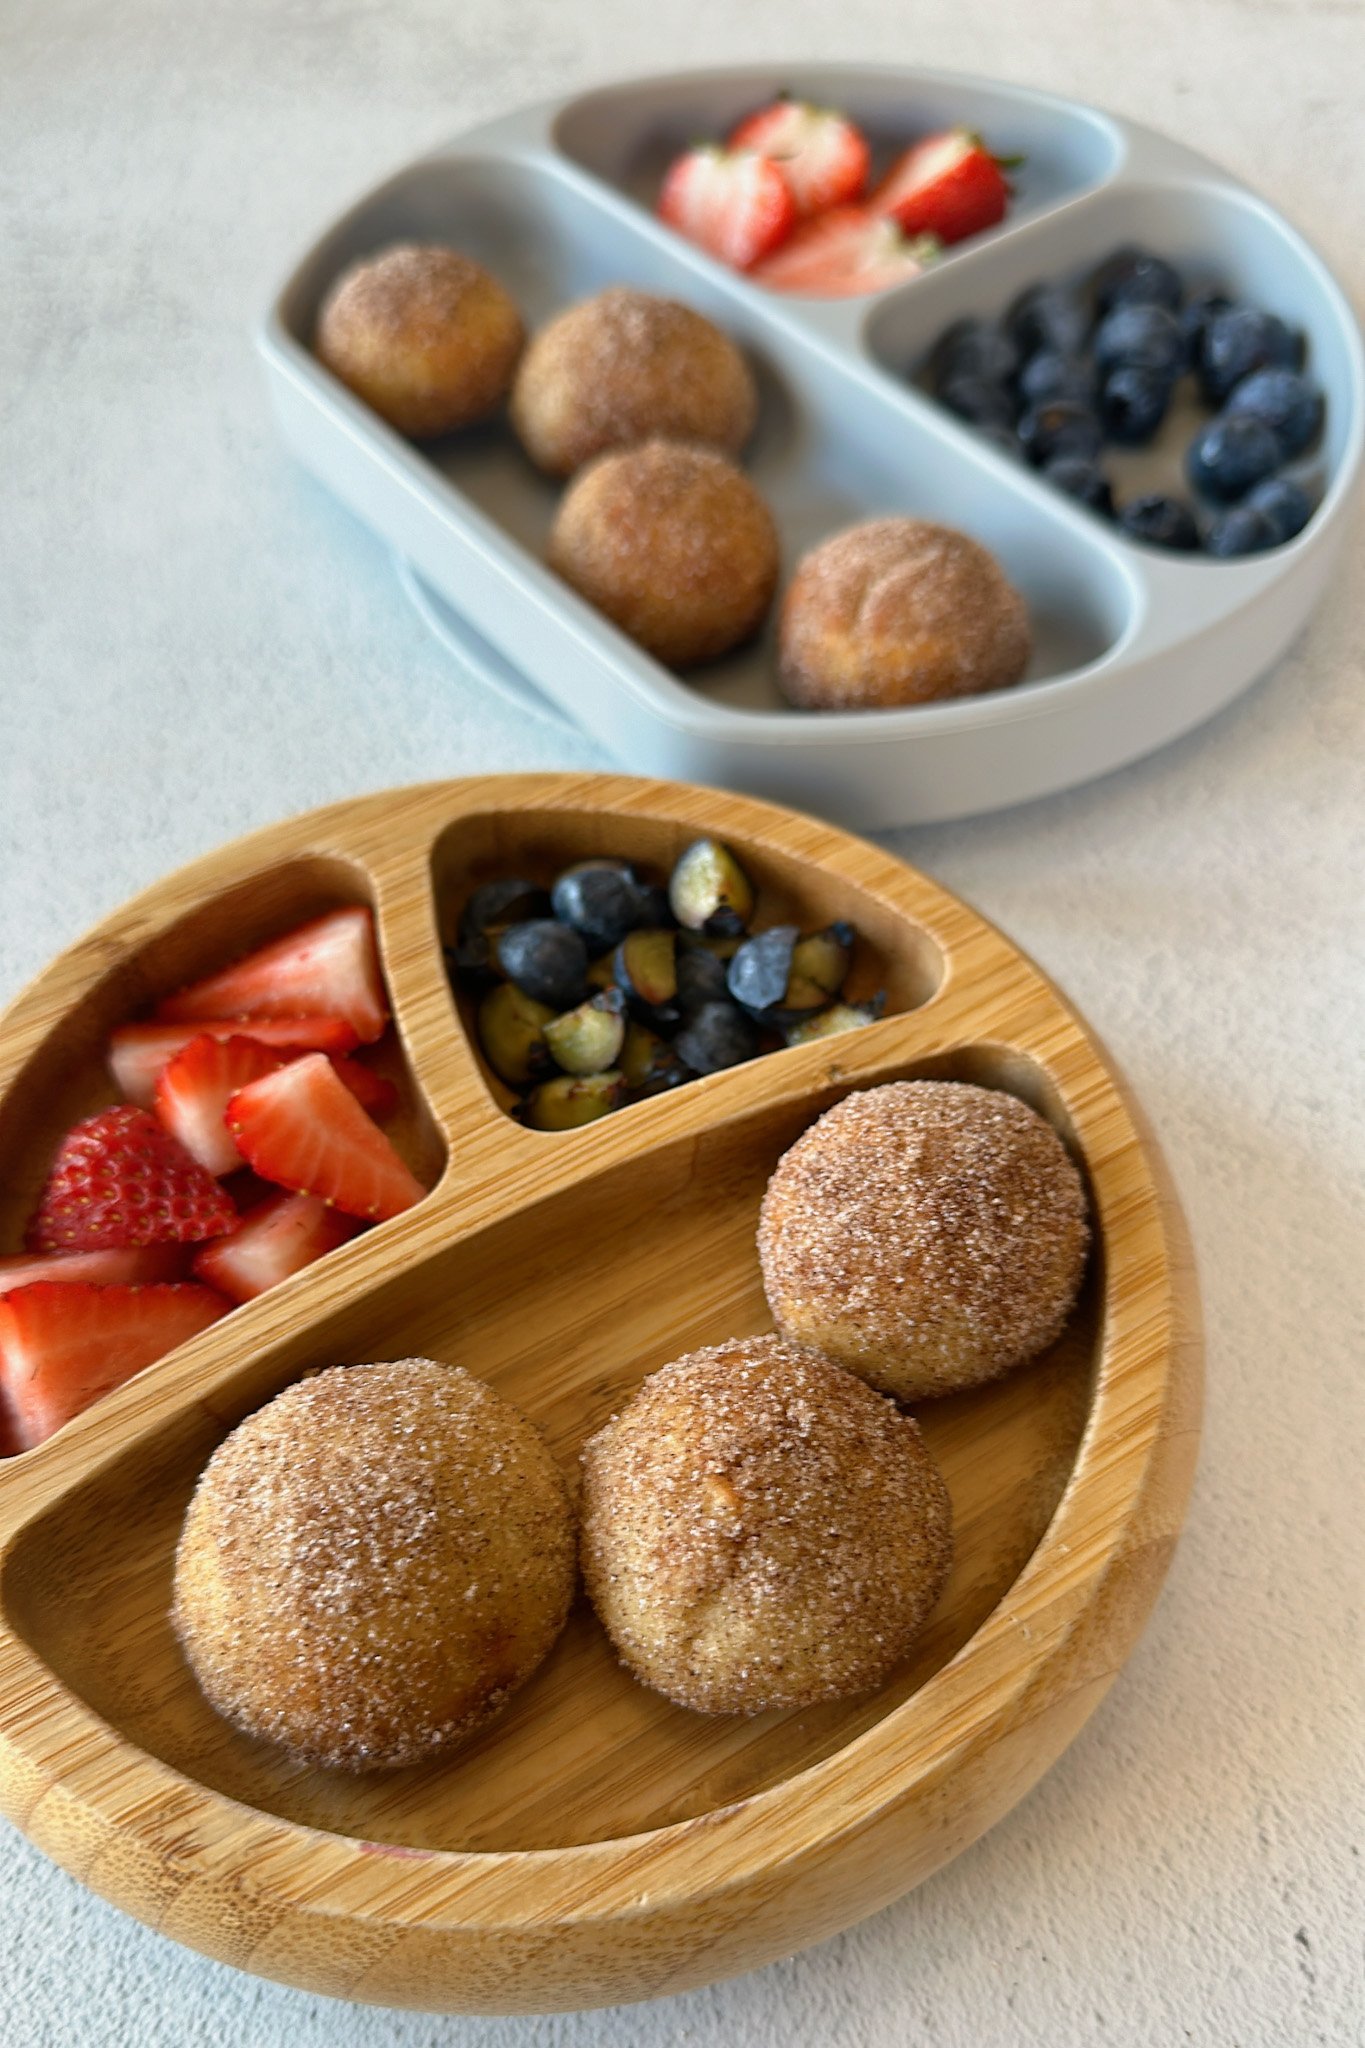 Air fryer donut holes served with strawberries and blueberries.